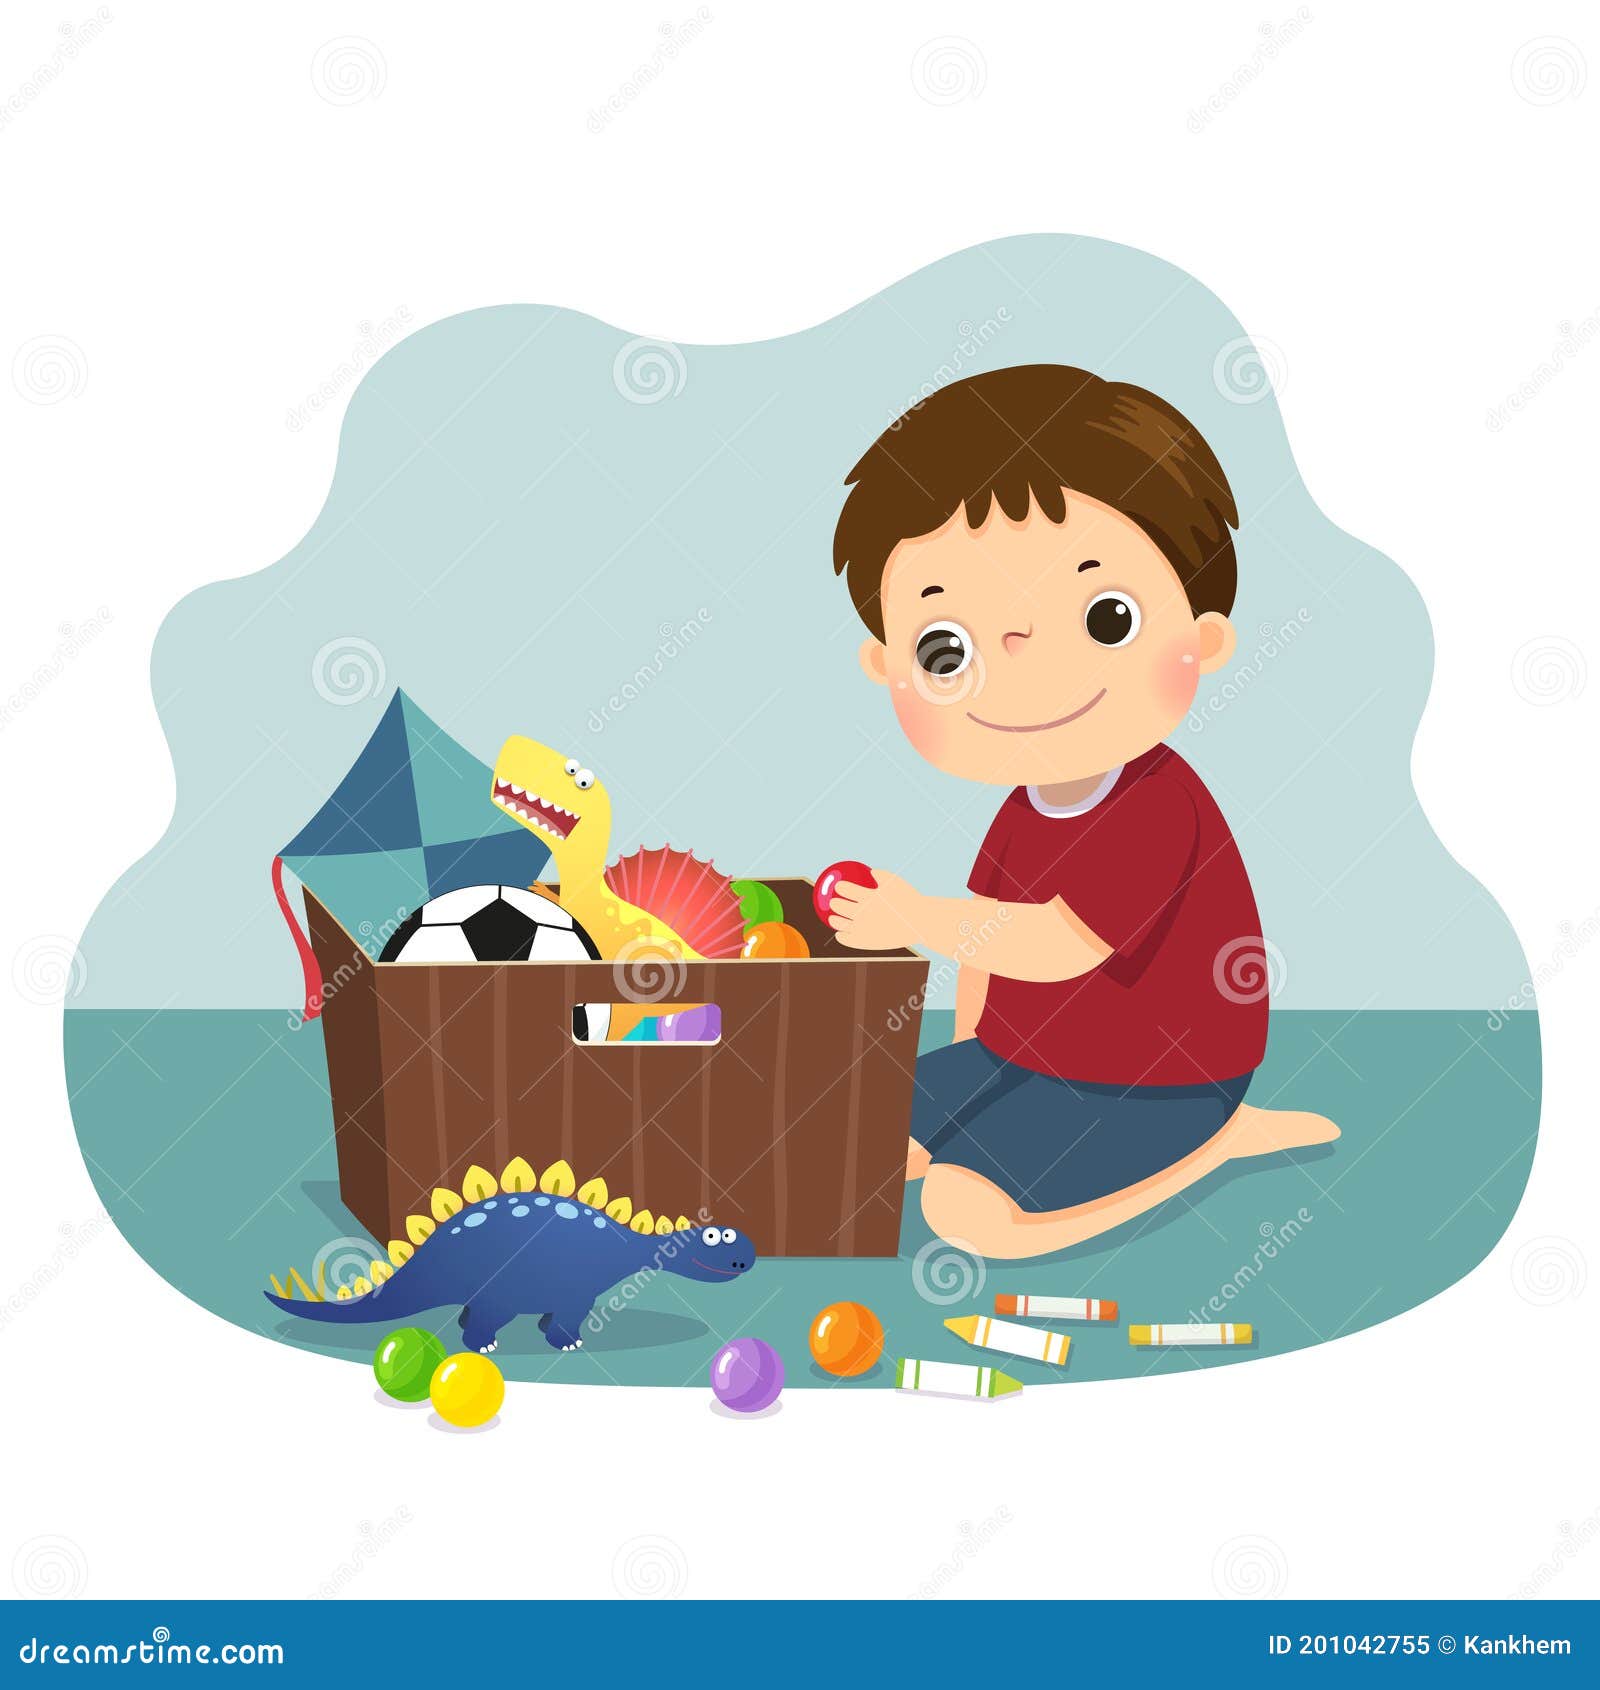 cartoon of a little boy putting his toys into the box. kids doing housework chores at home concept